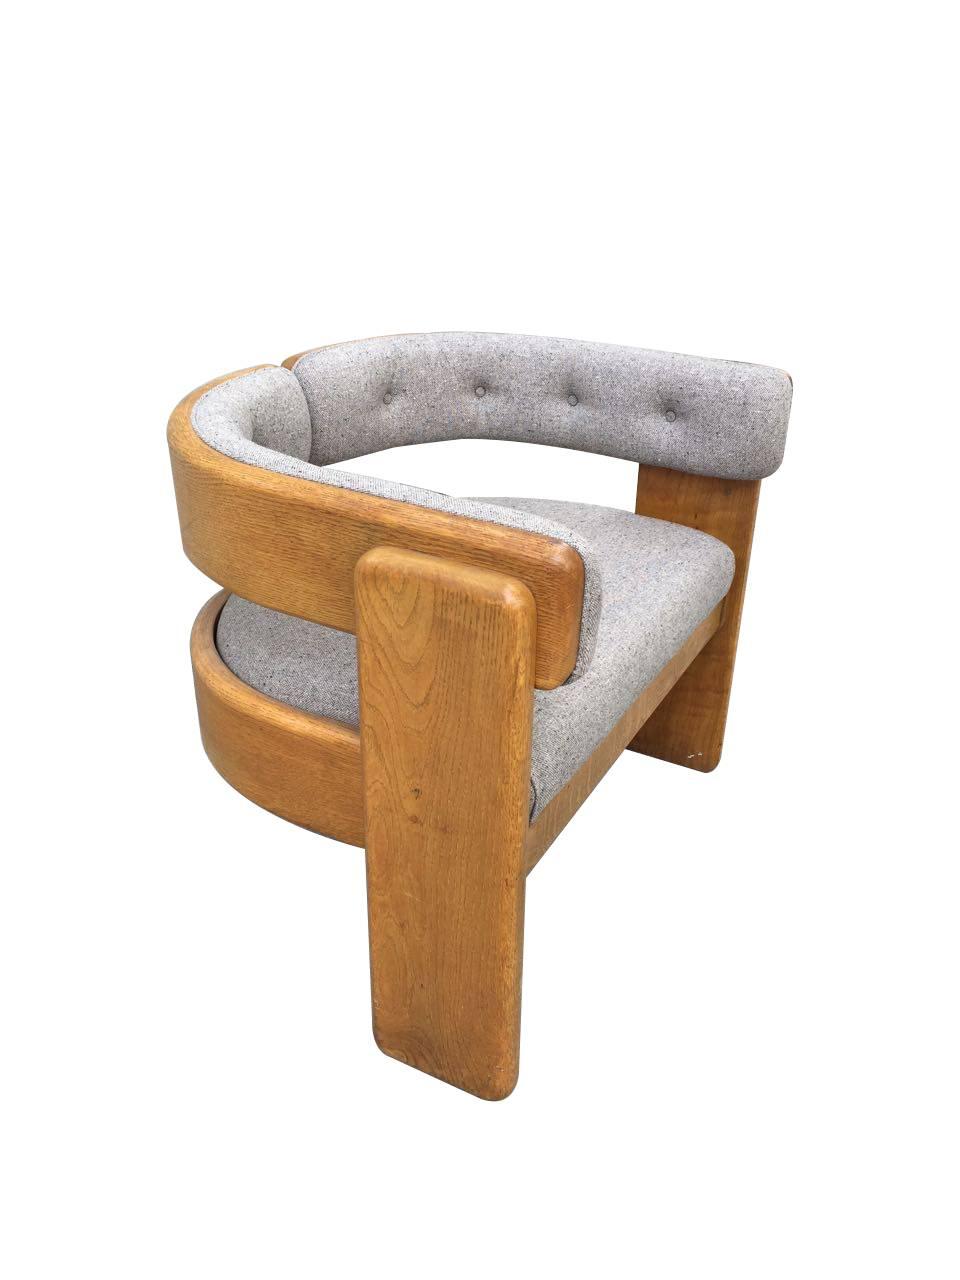 1970s. Rob wood structure. Curved design with backrest and seat in gray upholstery and smooth supports.

Tobia Scarpa was born in Venice and trained as an architect at IUAV University in the same city, where he met his wife and collaborator Afra